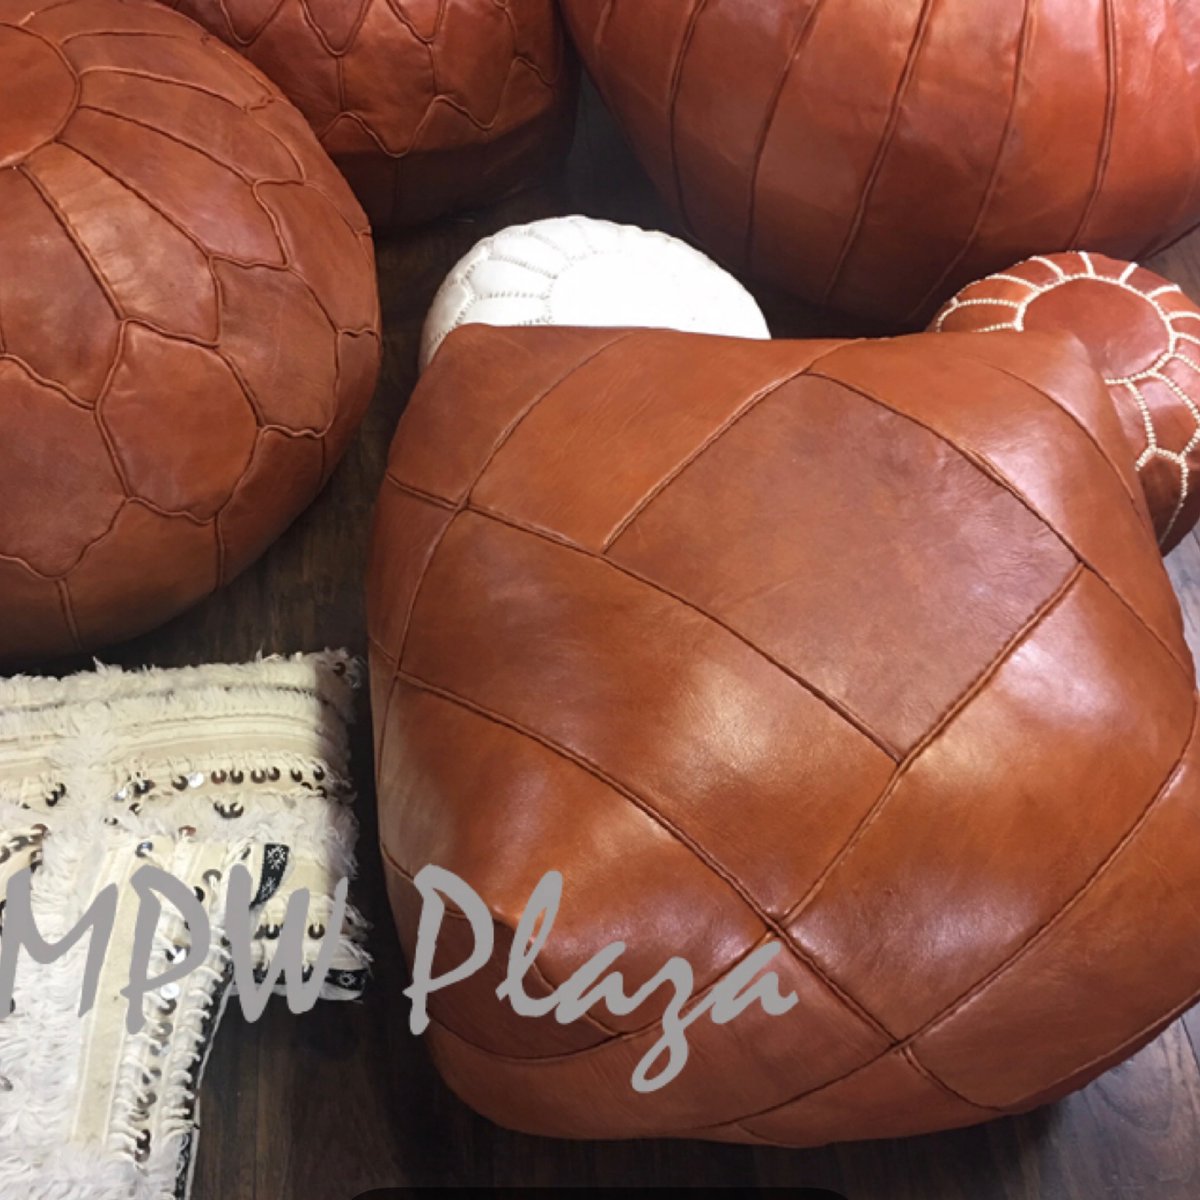 🌹Treat yourself to a Premium MPWplaza Luxury Pouf 🌺 ships from USA🌹
#luxuryhouses #luxurylifestyles #luxurygirl #luxurylivingroom #luxurystyle #luxuryapartments #luxuryshopping #luxuryshoes #luxurybags #luxurycollection #luxurycondos #luxurymansion #luxuryproperty #affiliate